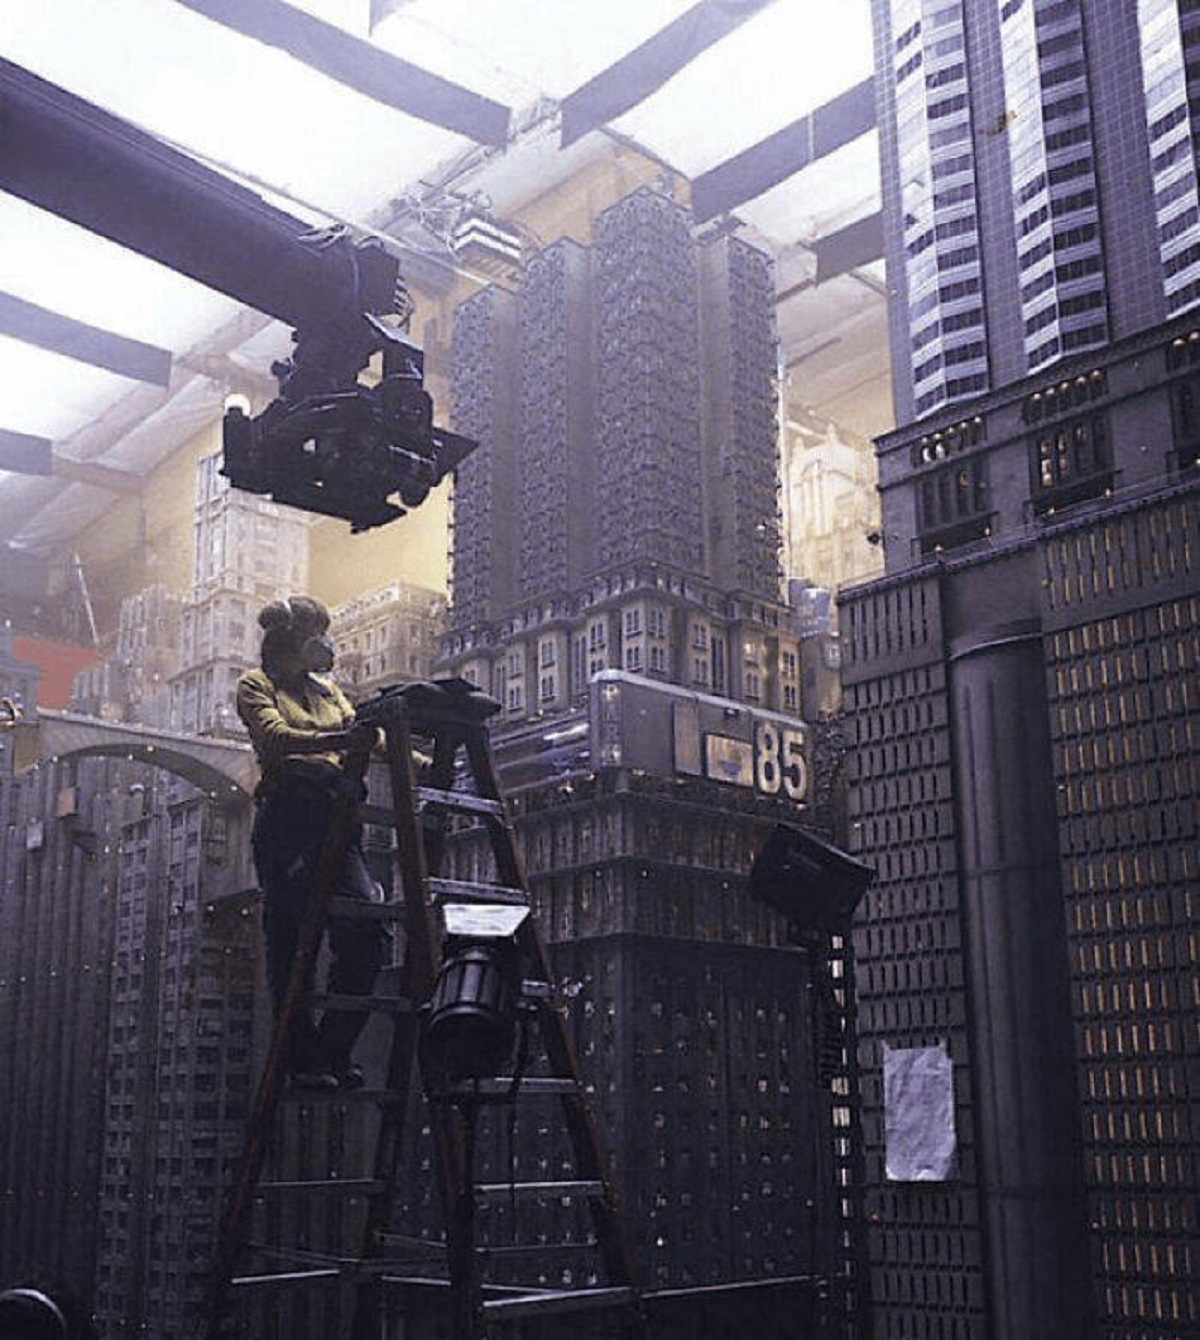 "The Fifth Element (1997) - The Amazing Miniature Work Behind The New York Cityscape Of The Movie"